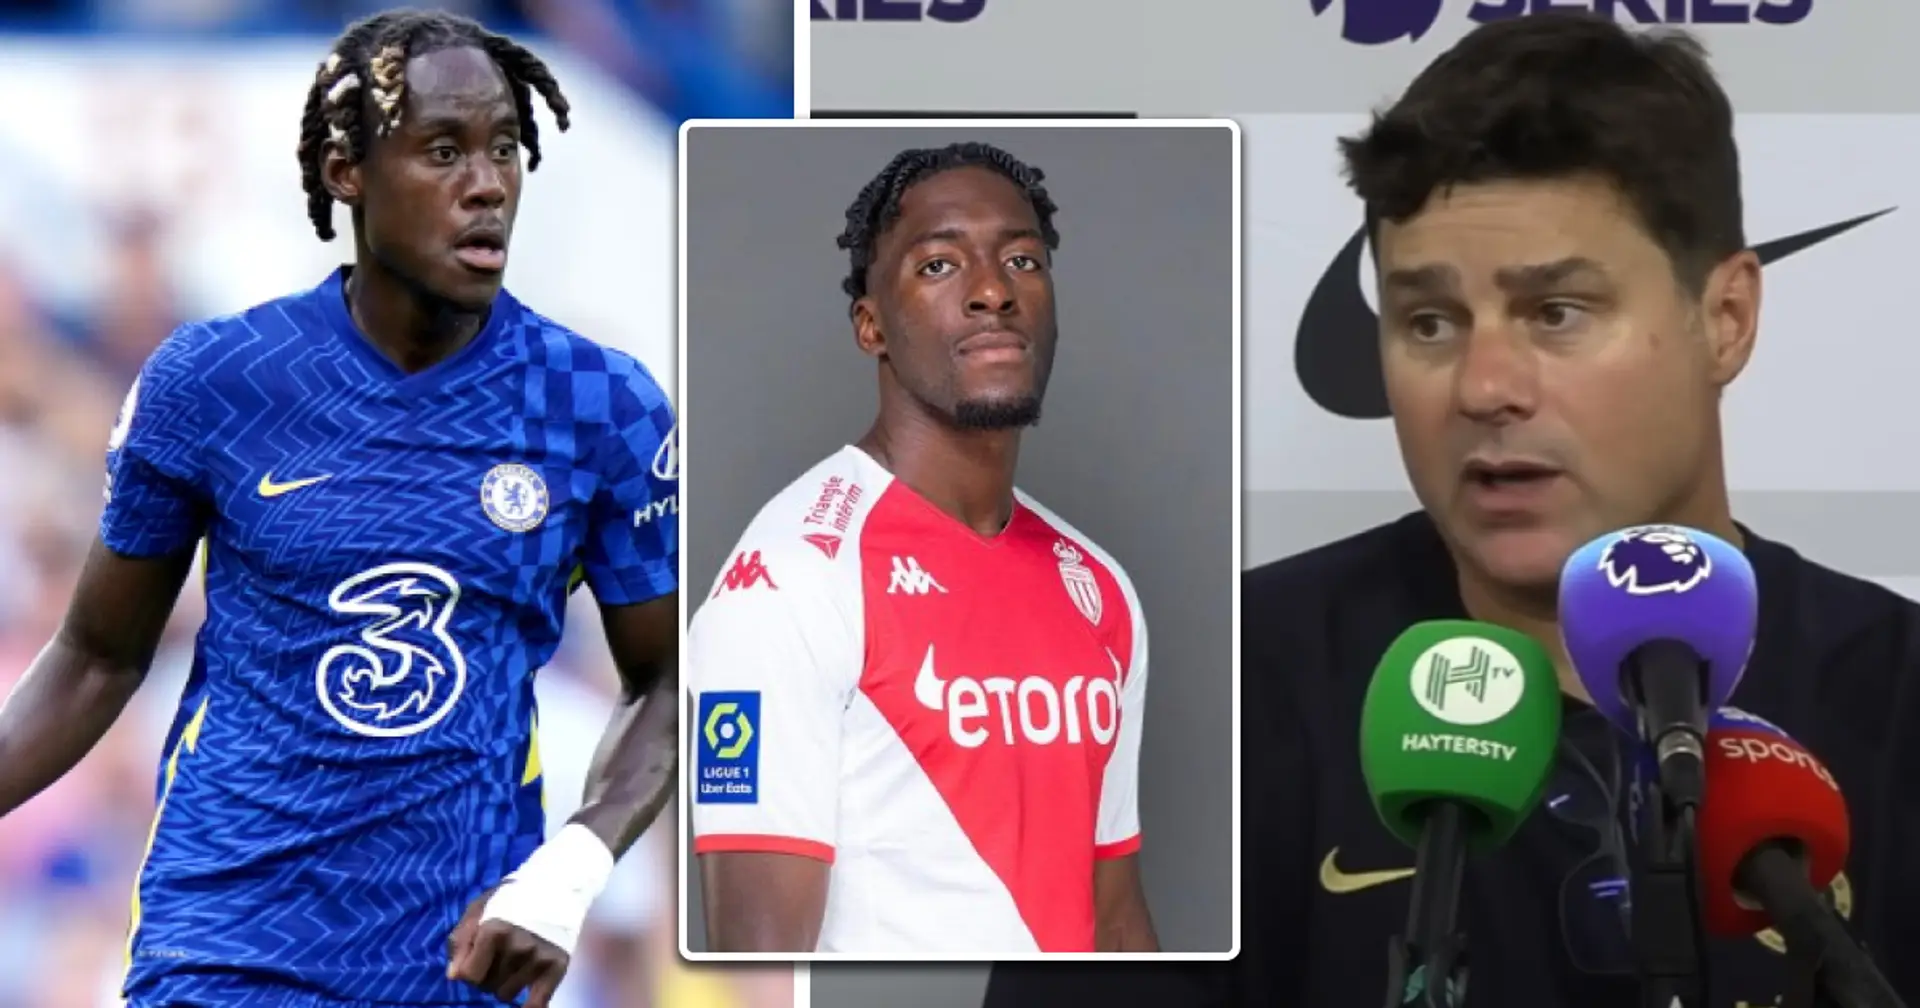 Chalobah set to leave Chelsea as club agrees £38.6m deal for Axel Disasi